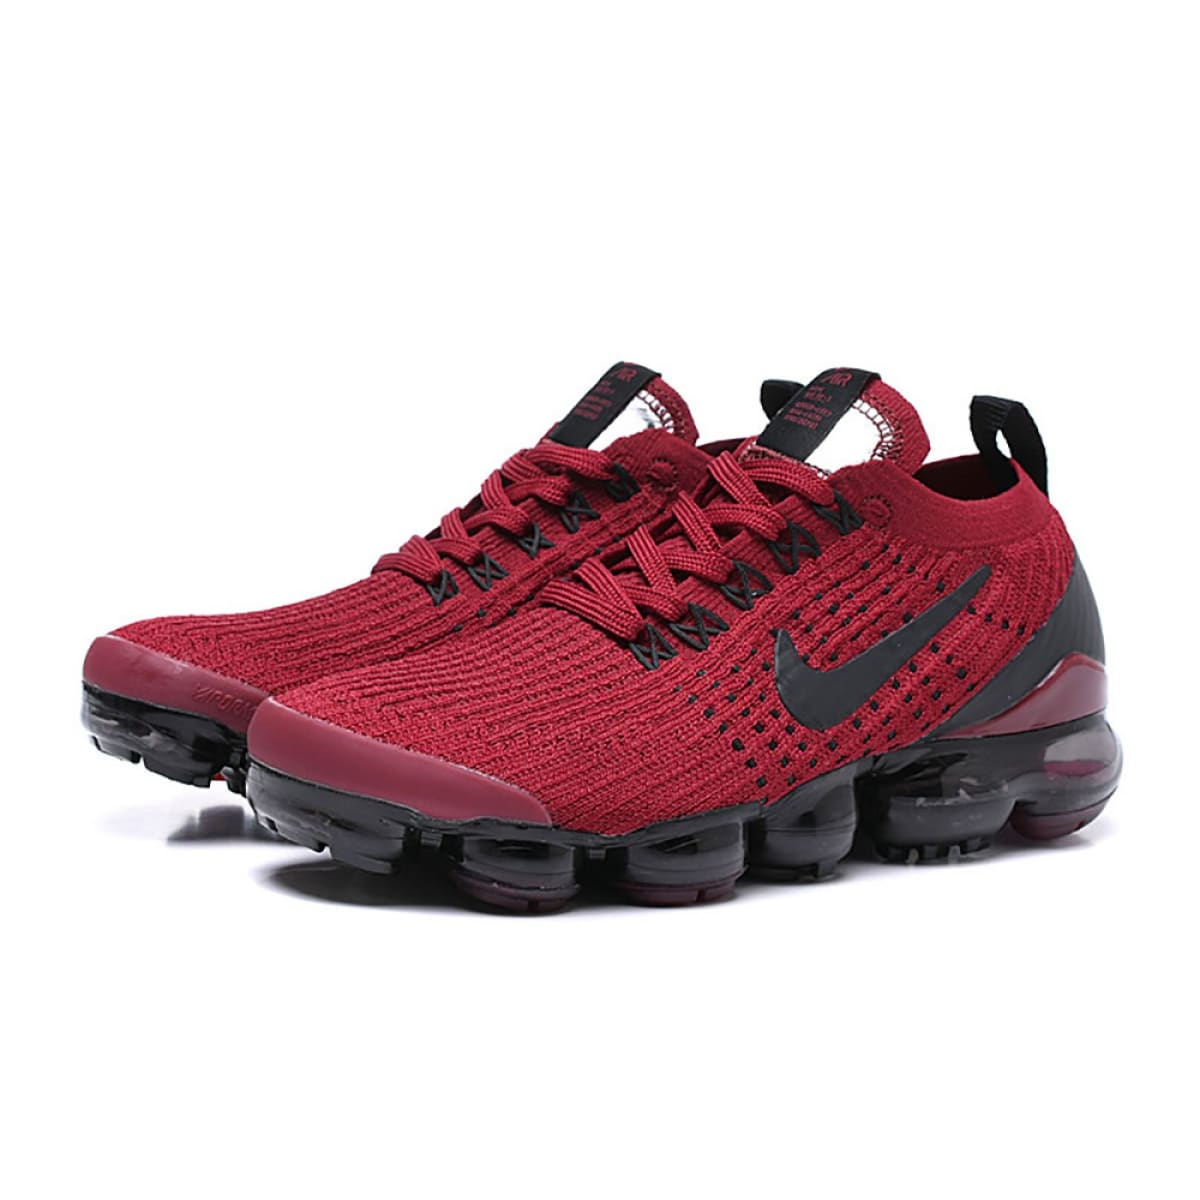 vapormax flyknit 3 noble red